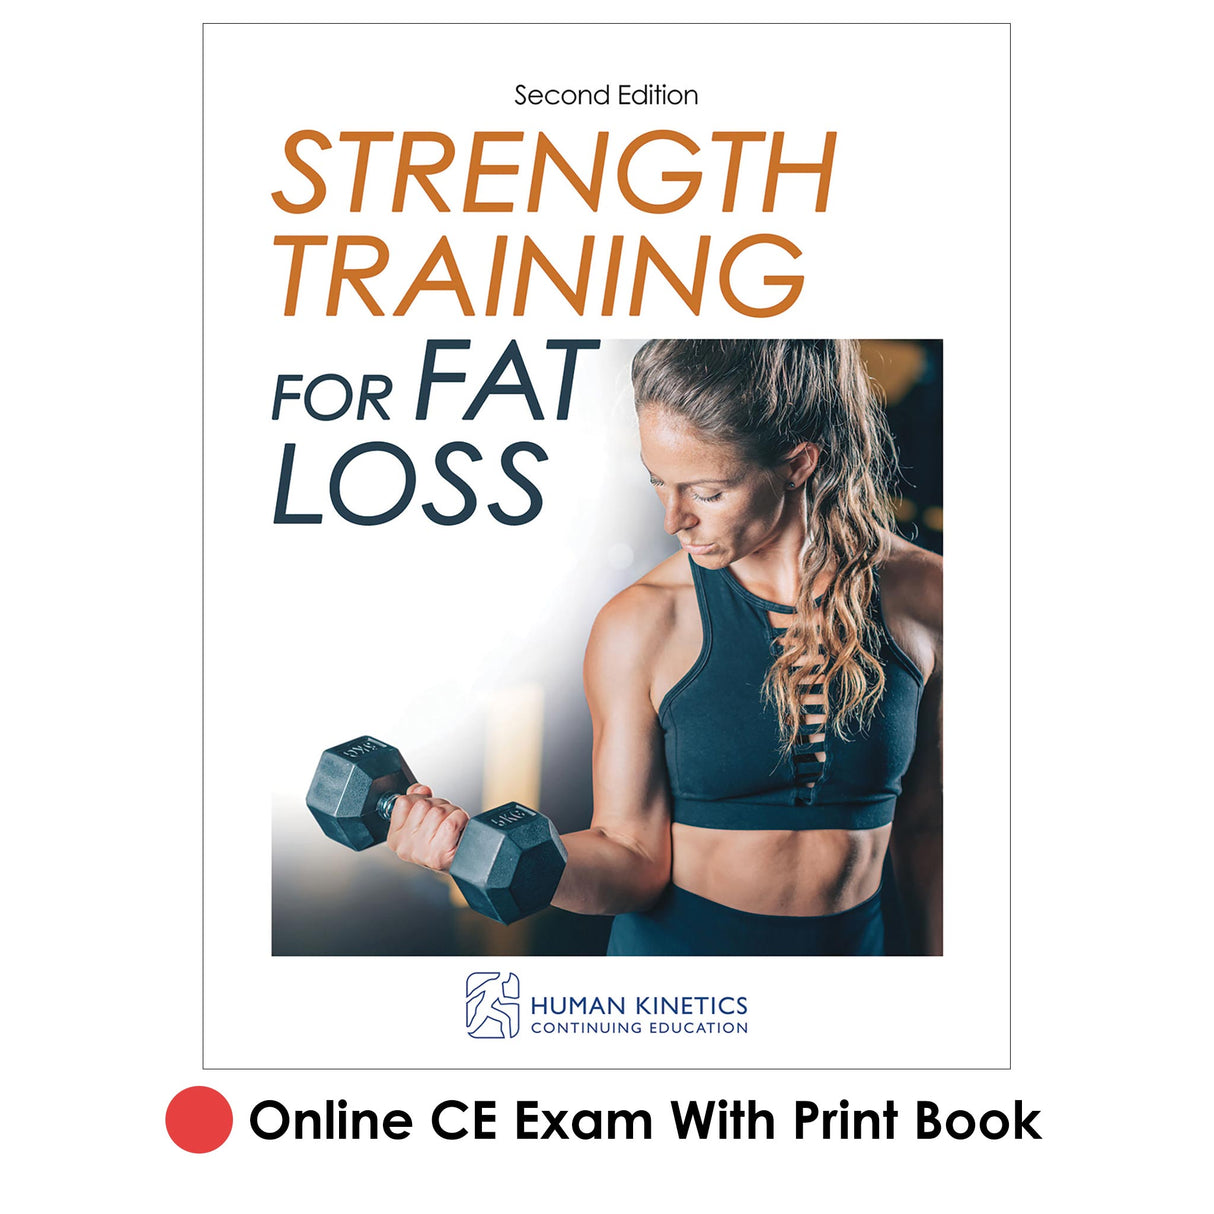 Strength Training for Fat Loss 2nd Edition Online CE Exam With Print Book